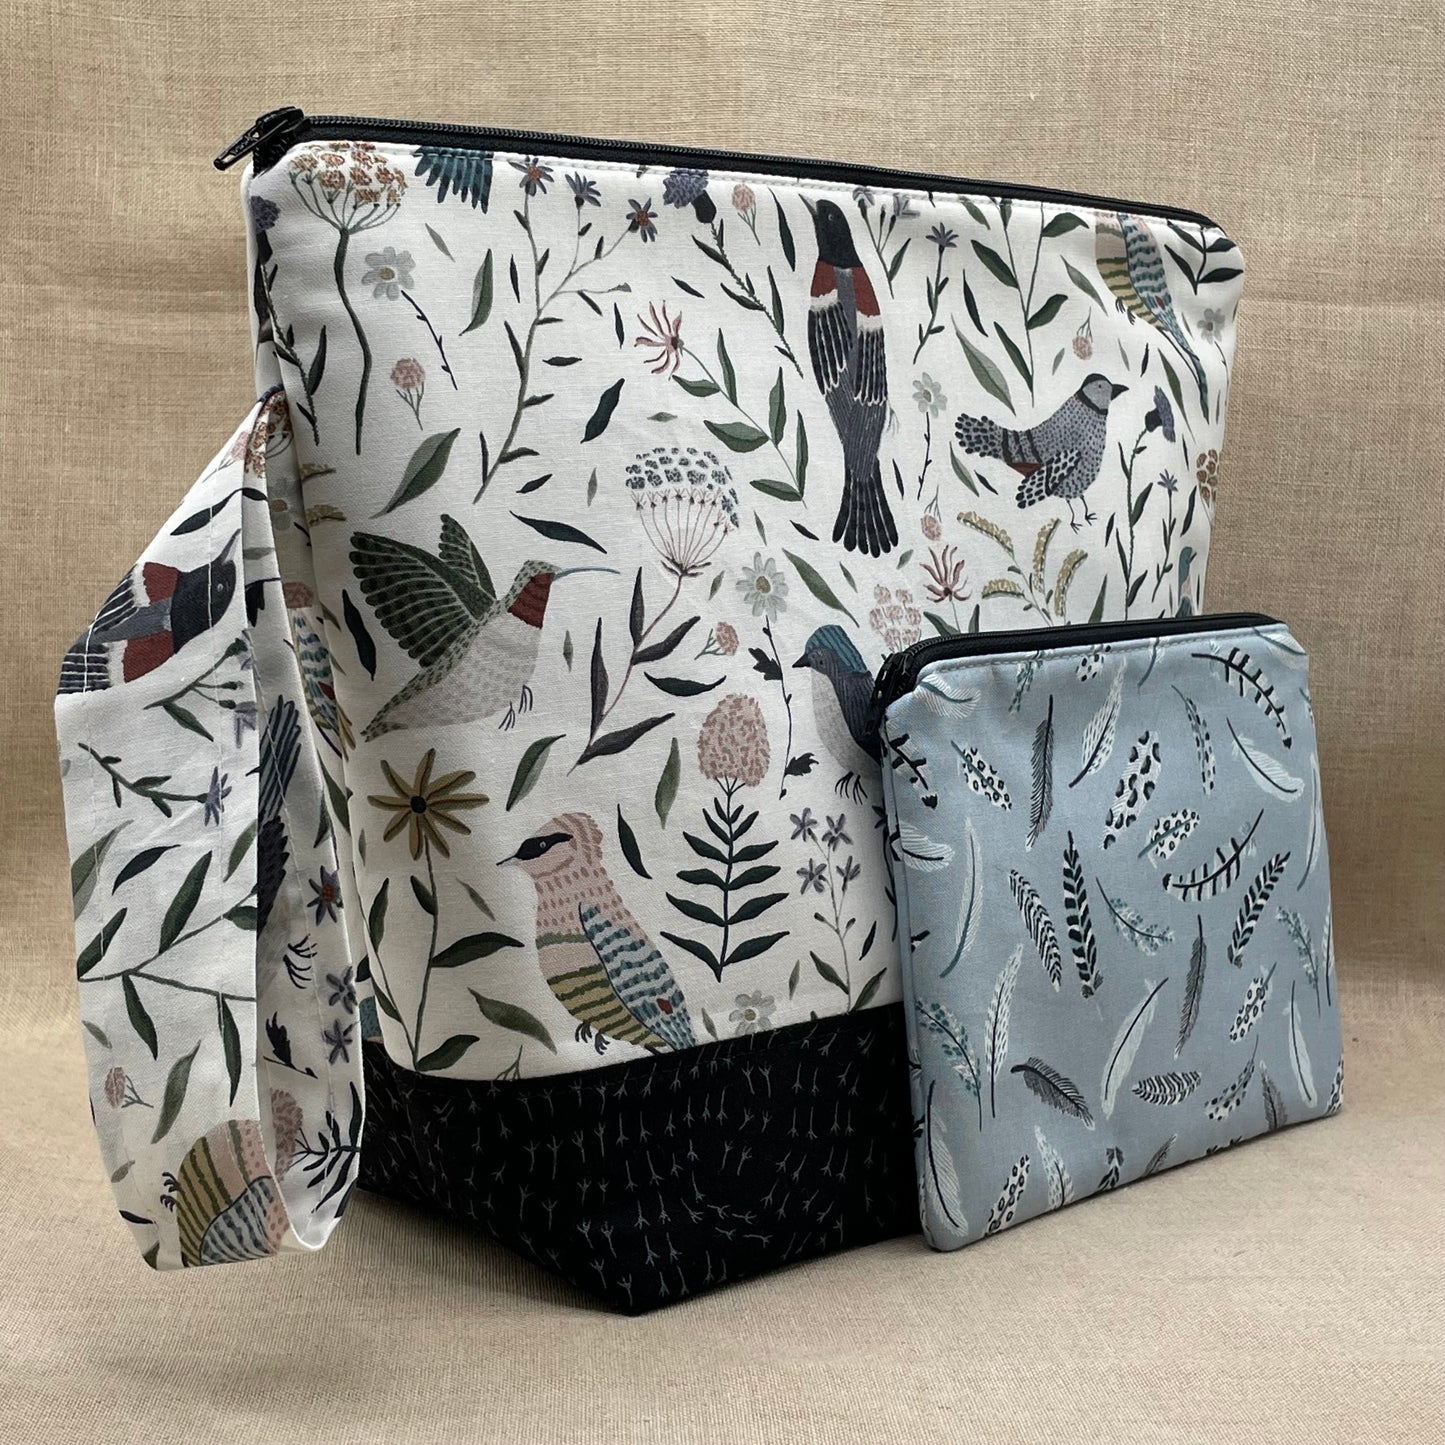 Chirp Chirp - Project Bag with Coordinating Notions Pouch